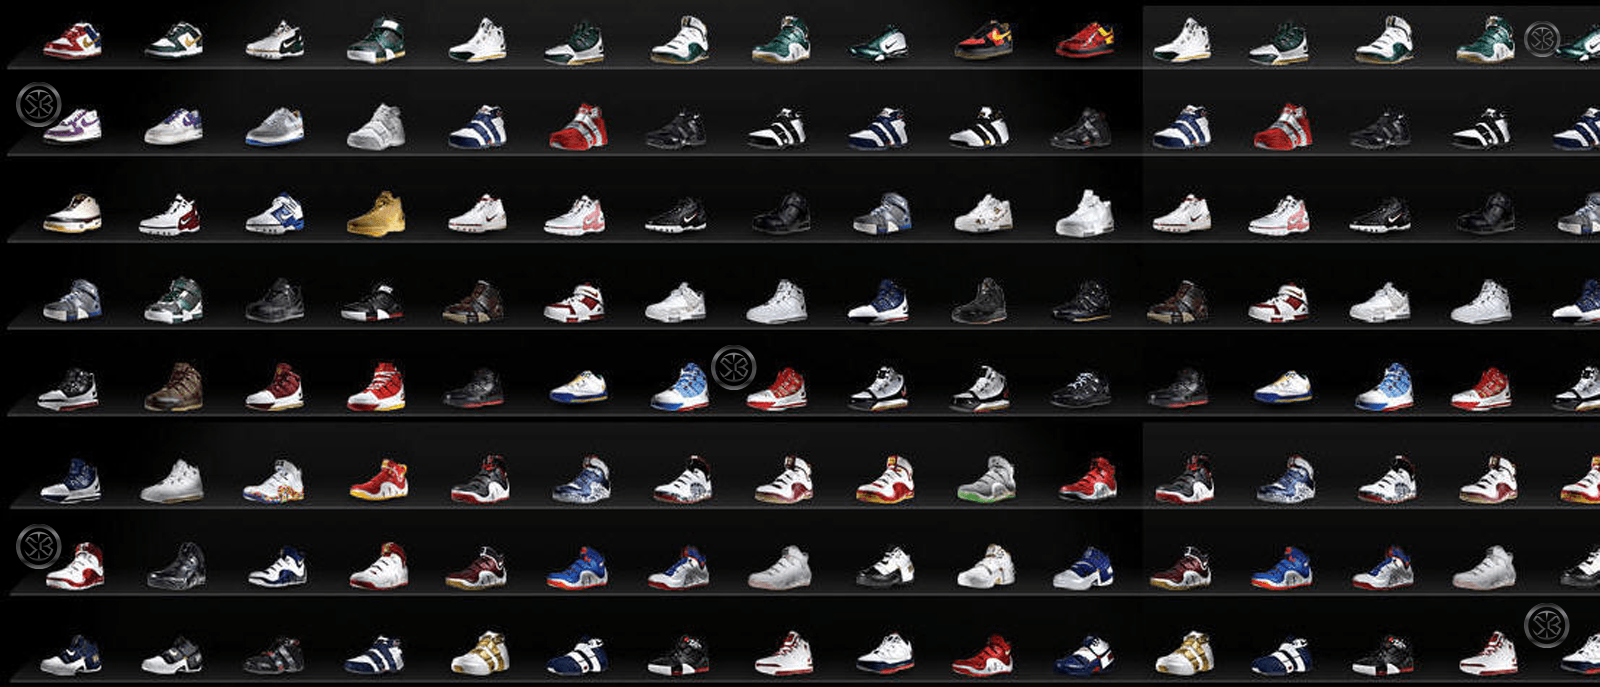 White Sneakers Wallpaper High Quality Resolution